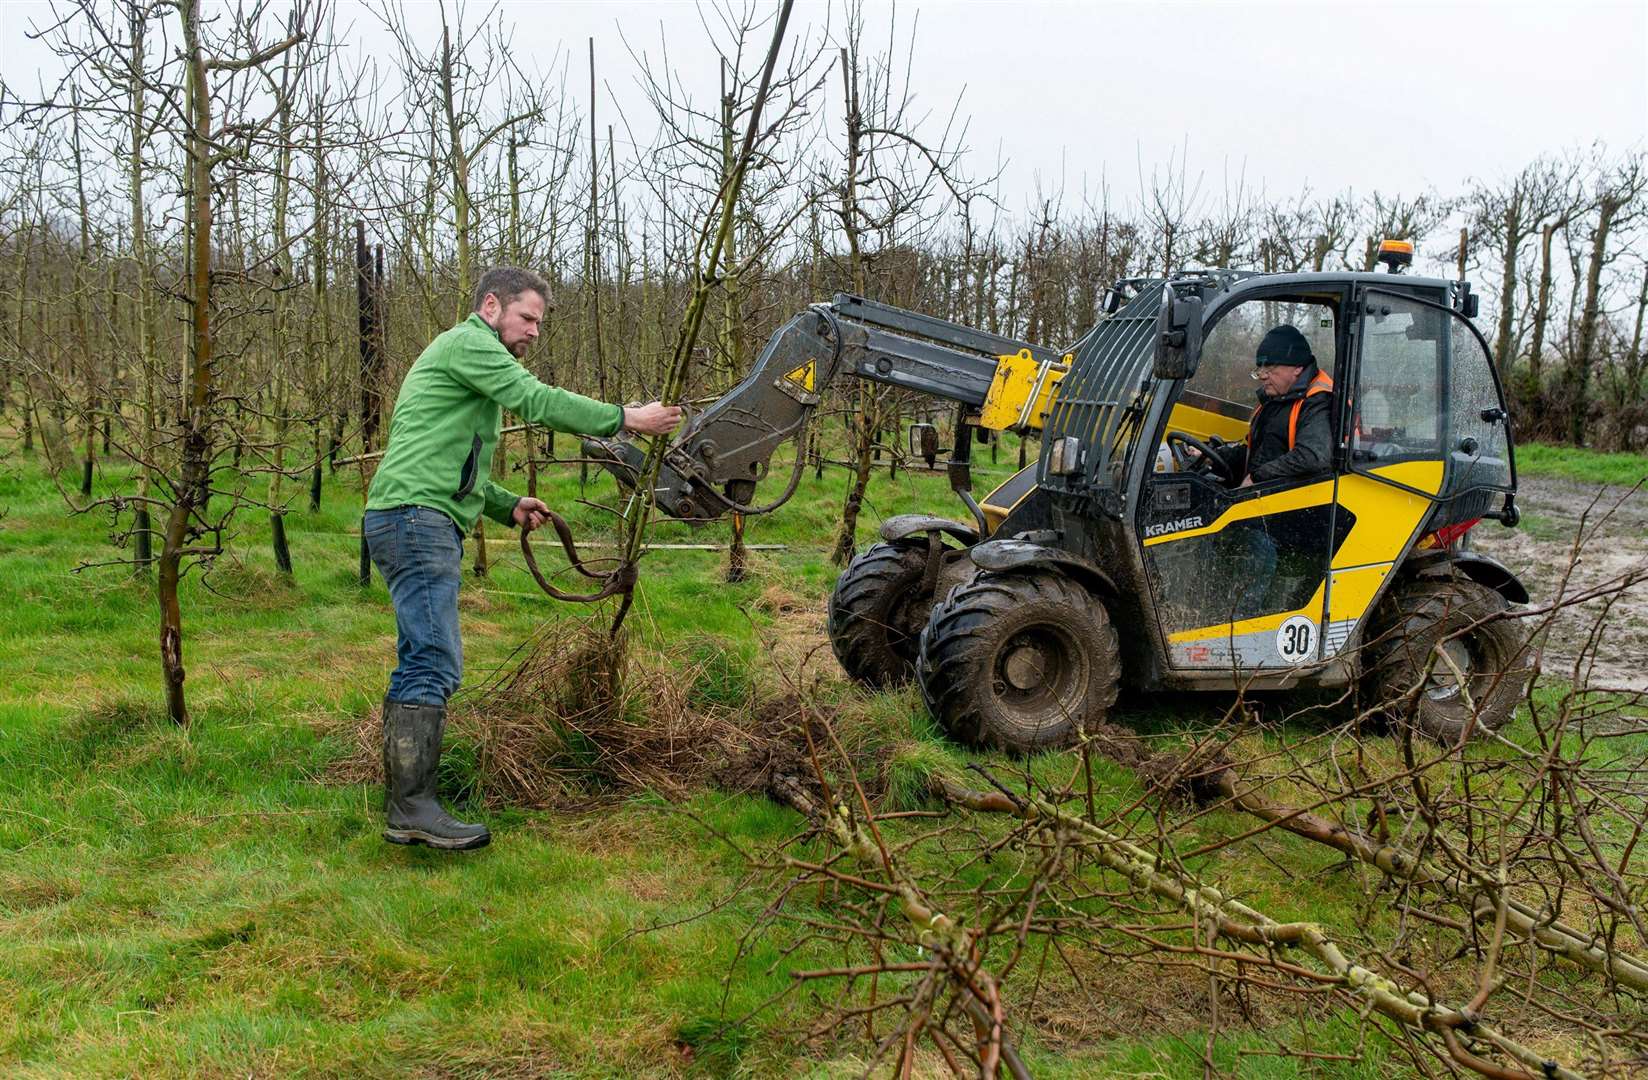 He has made the decision to dig up some of his apple orchards. Picture: SNWS